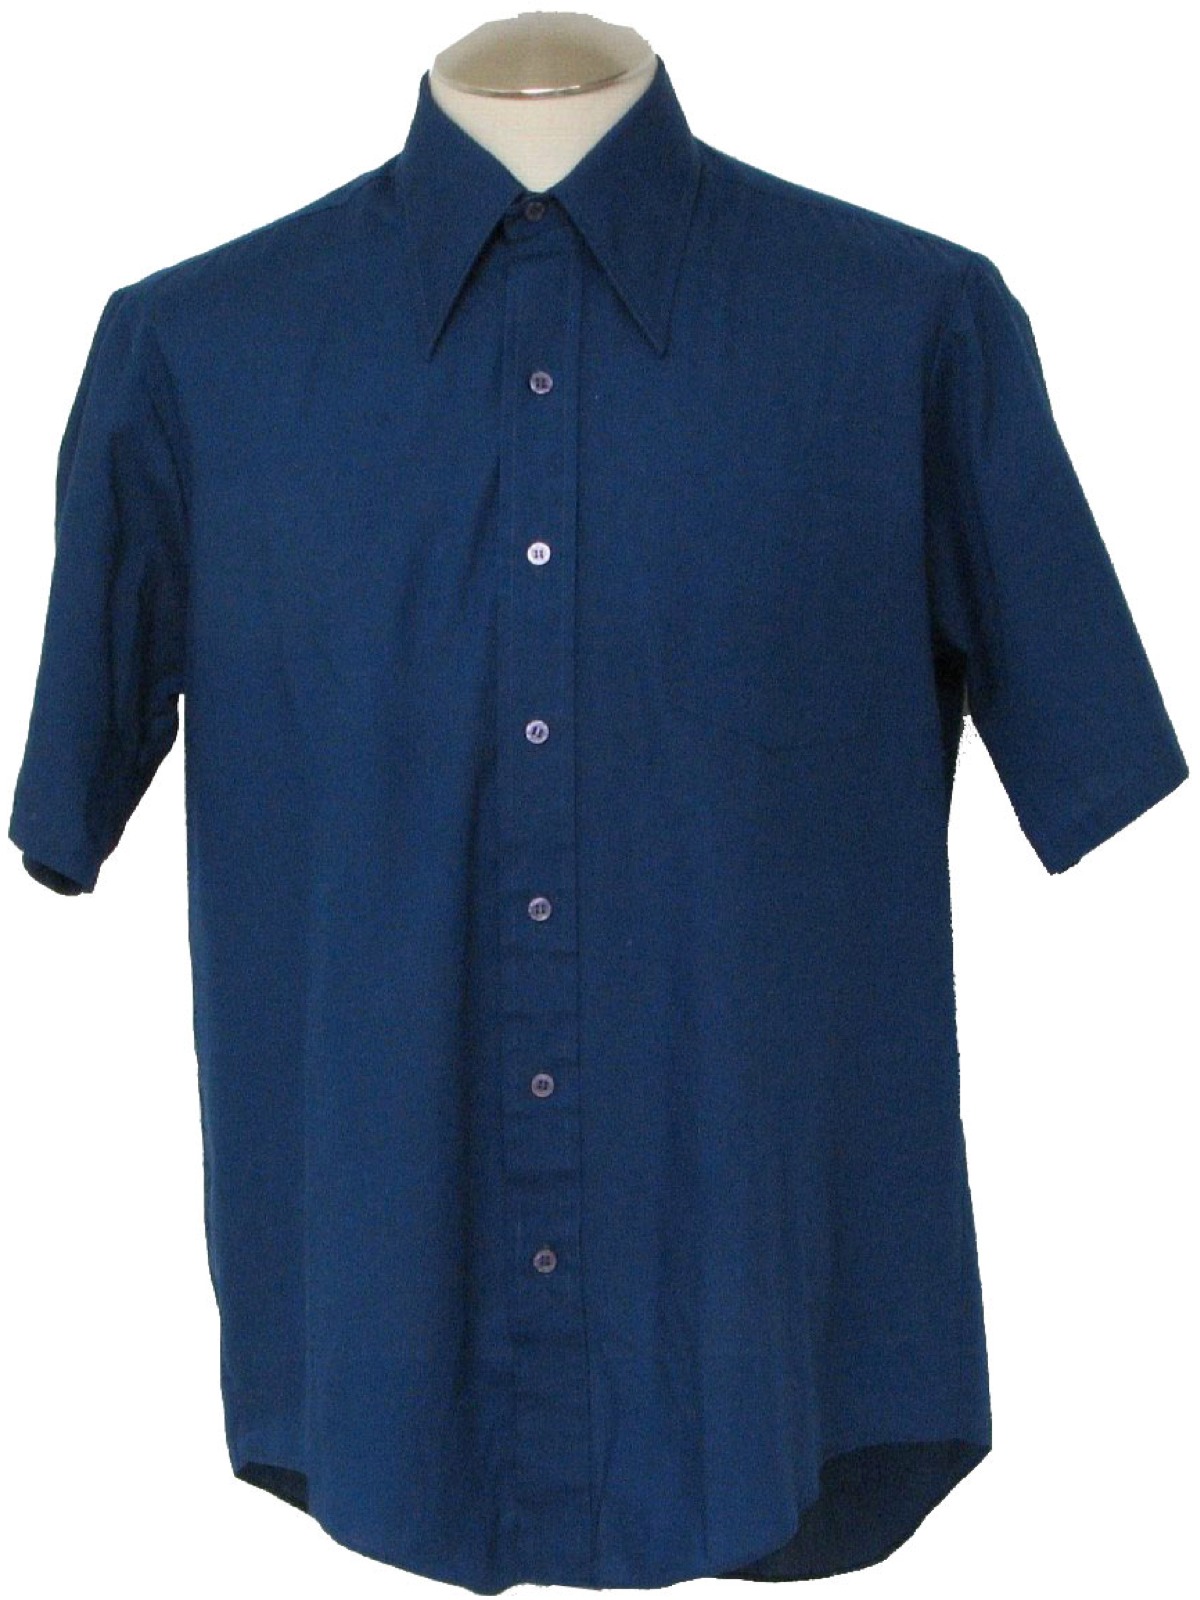 Retro Seventies Shirt: 70s -JCPenney- Mens navy, polyester cotton ...